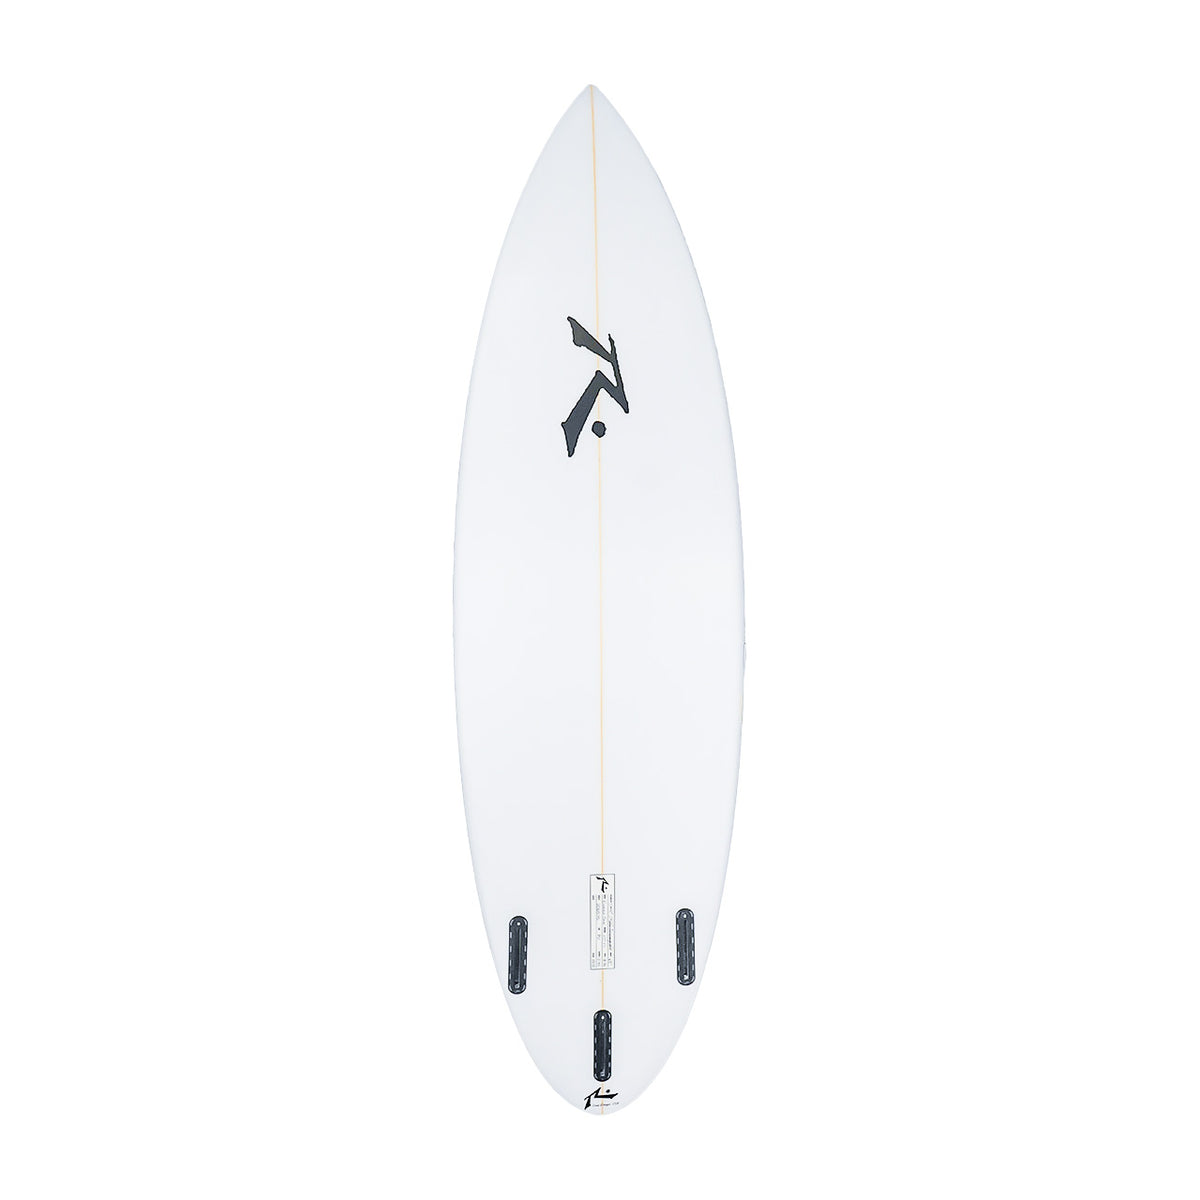 Enough Said High Performance Shortboard - Bottom View - Rusty Surfboards